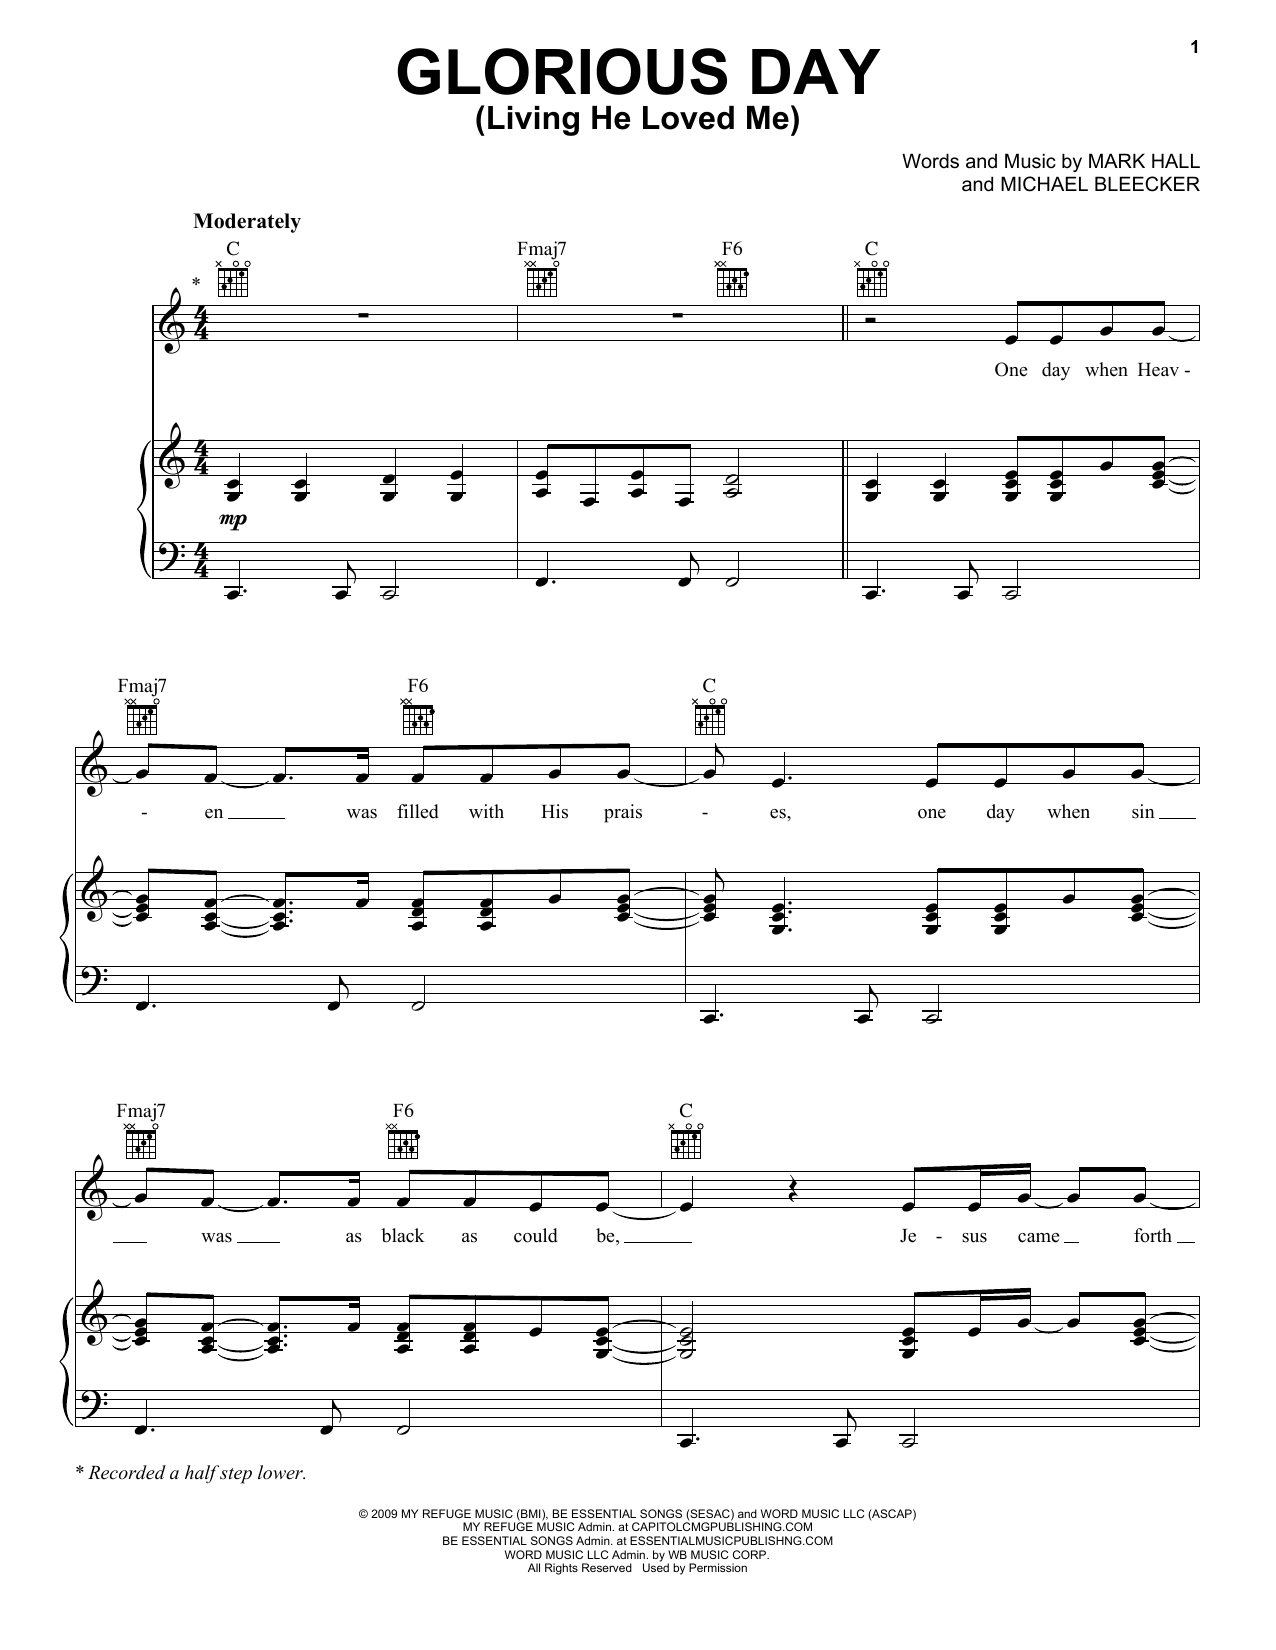 casting-crowns-glorious-day-living-he-loved-me-sheet-music-notes